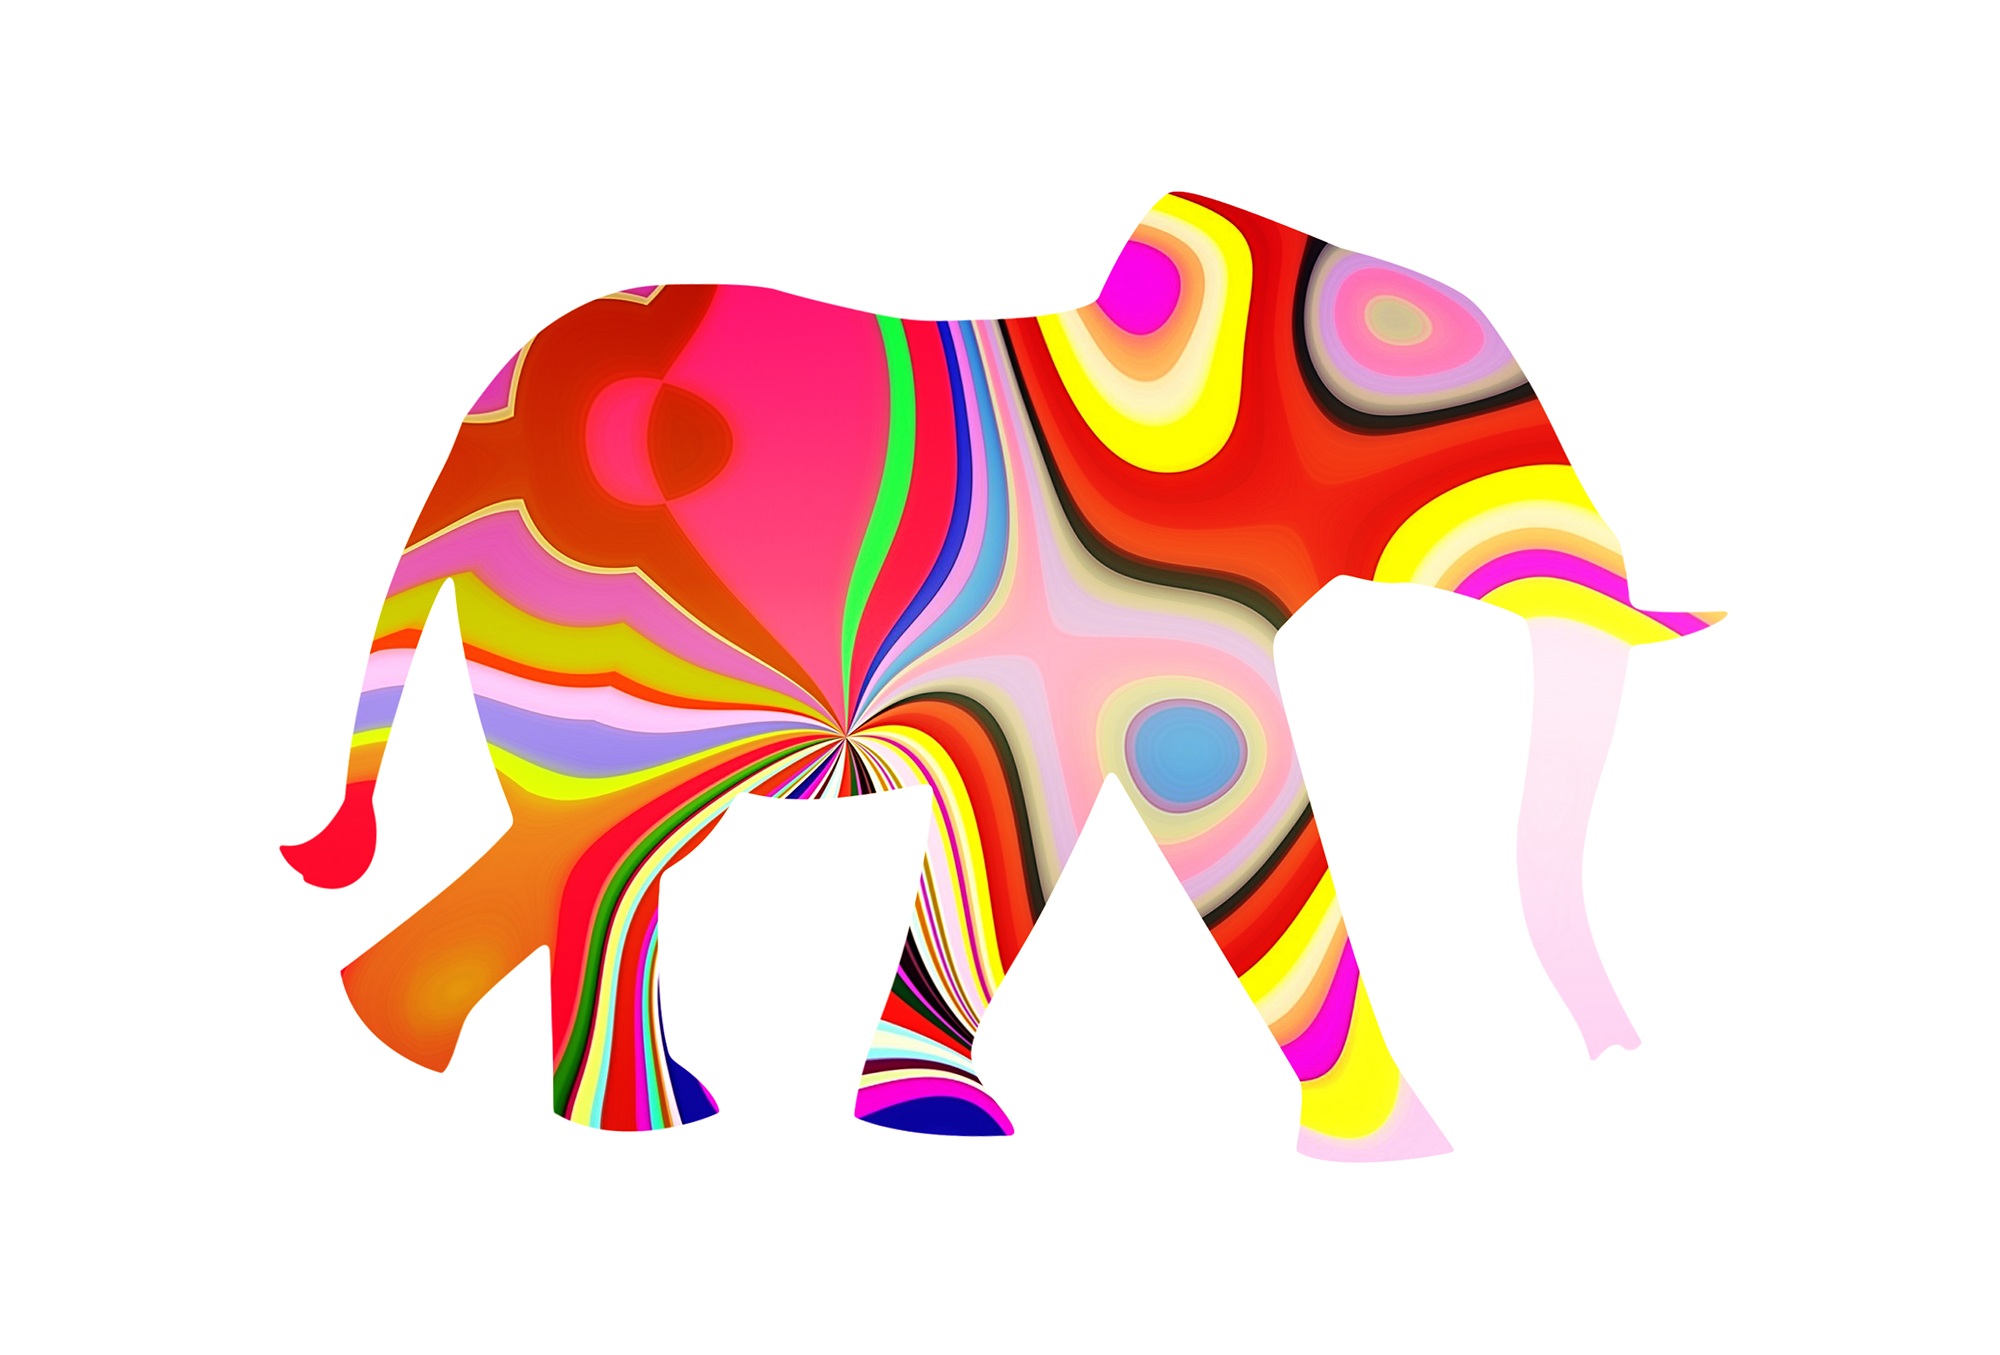 Elephant With Pattern free image download